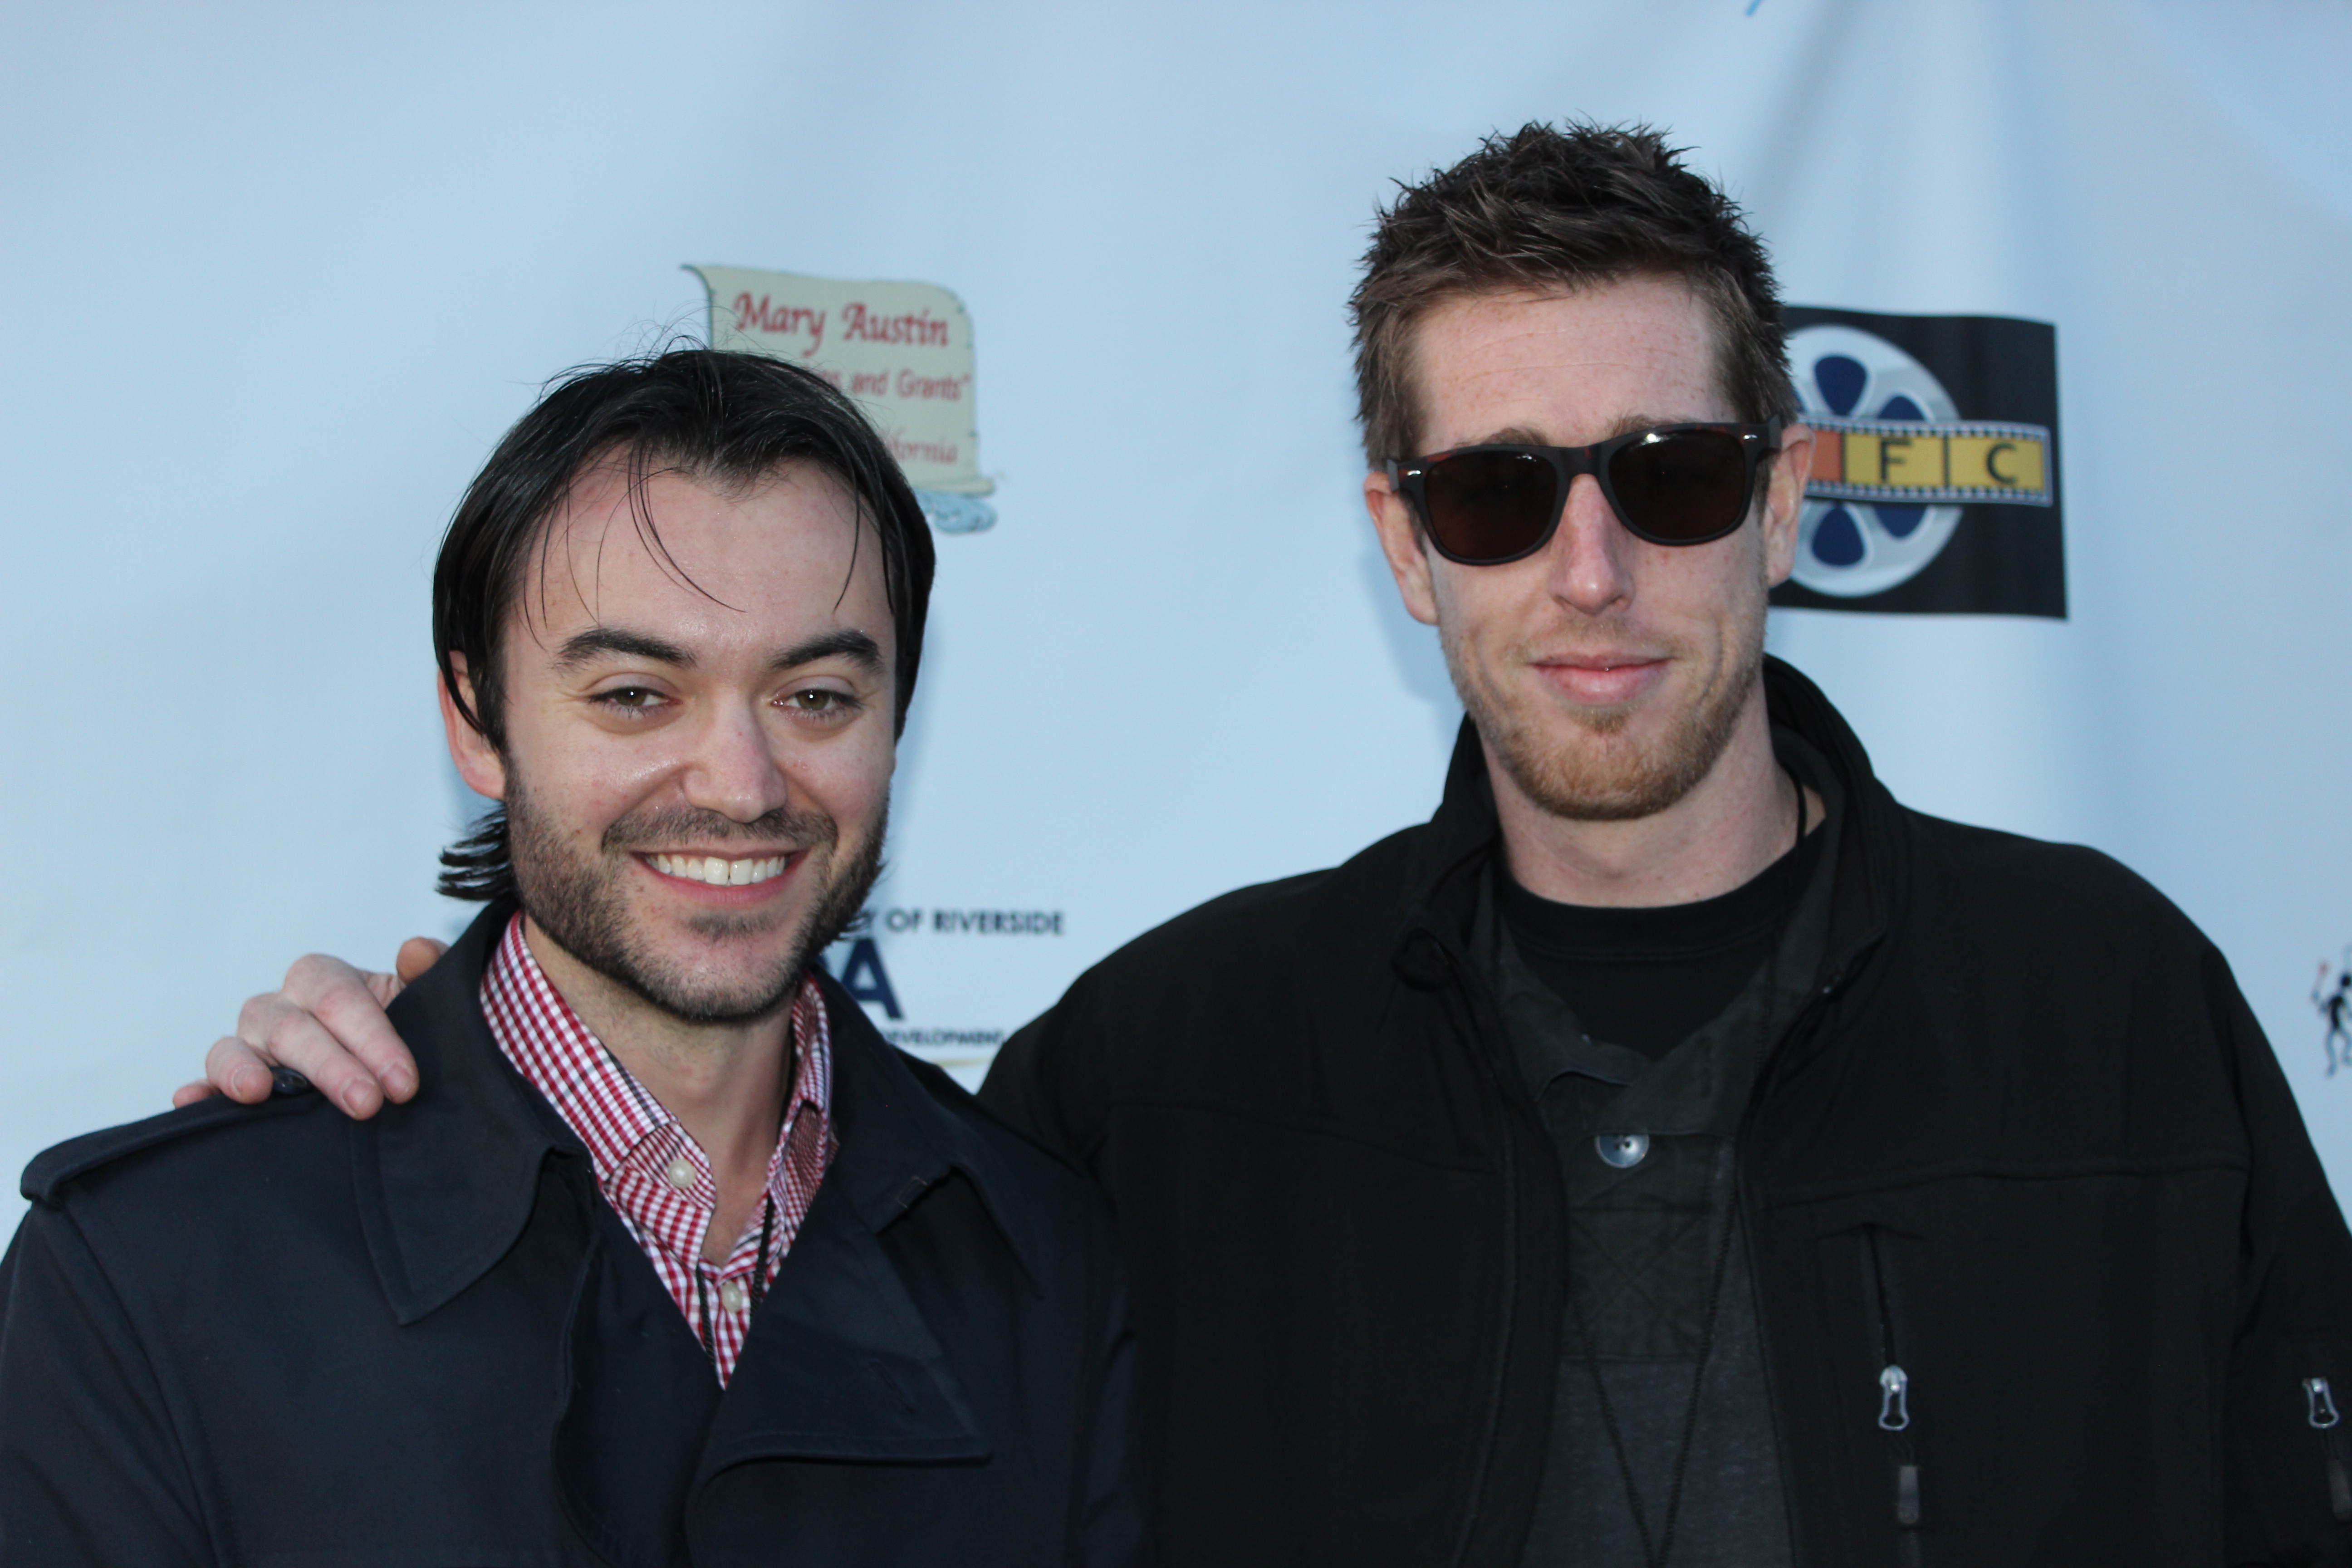 Chris Levine and Landon Williams (Director of Perception) at the screening of The Blind Date at the Idyllwild International Festival of Cinema.